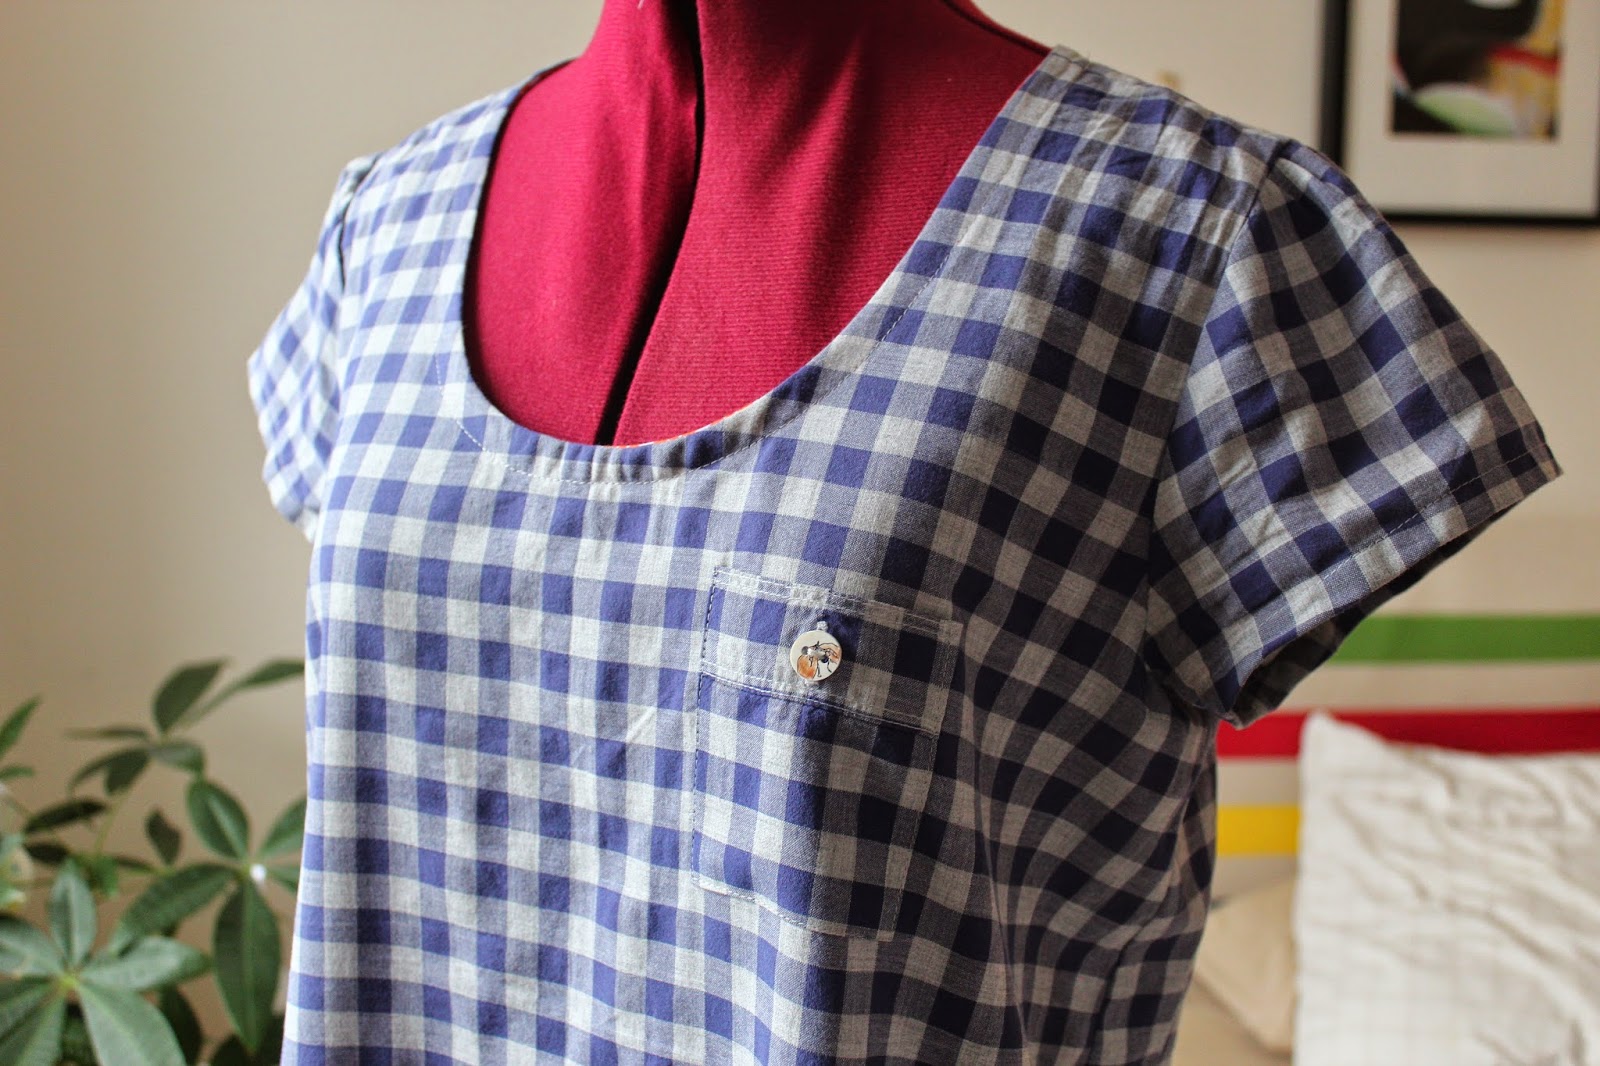 Beau Baby: How to: Sew a Scout Tee from a Men's Shirt